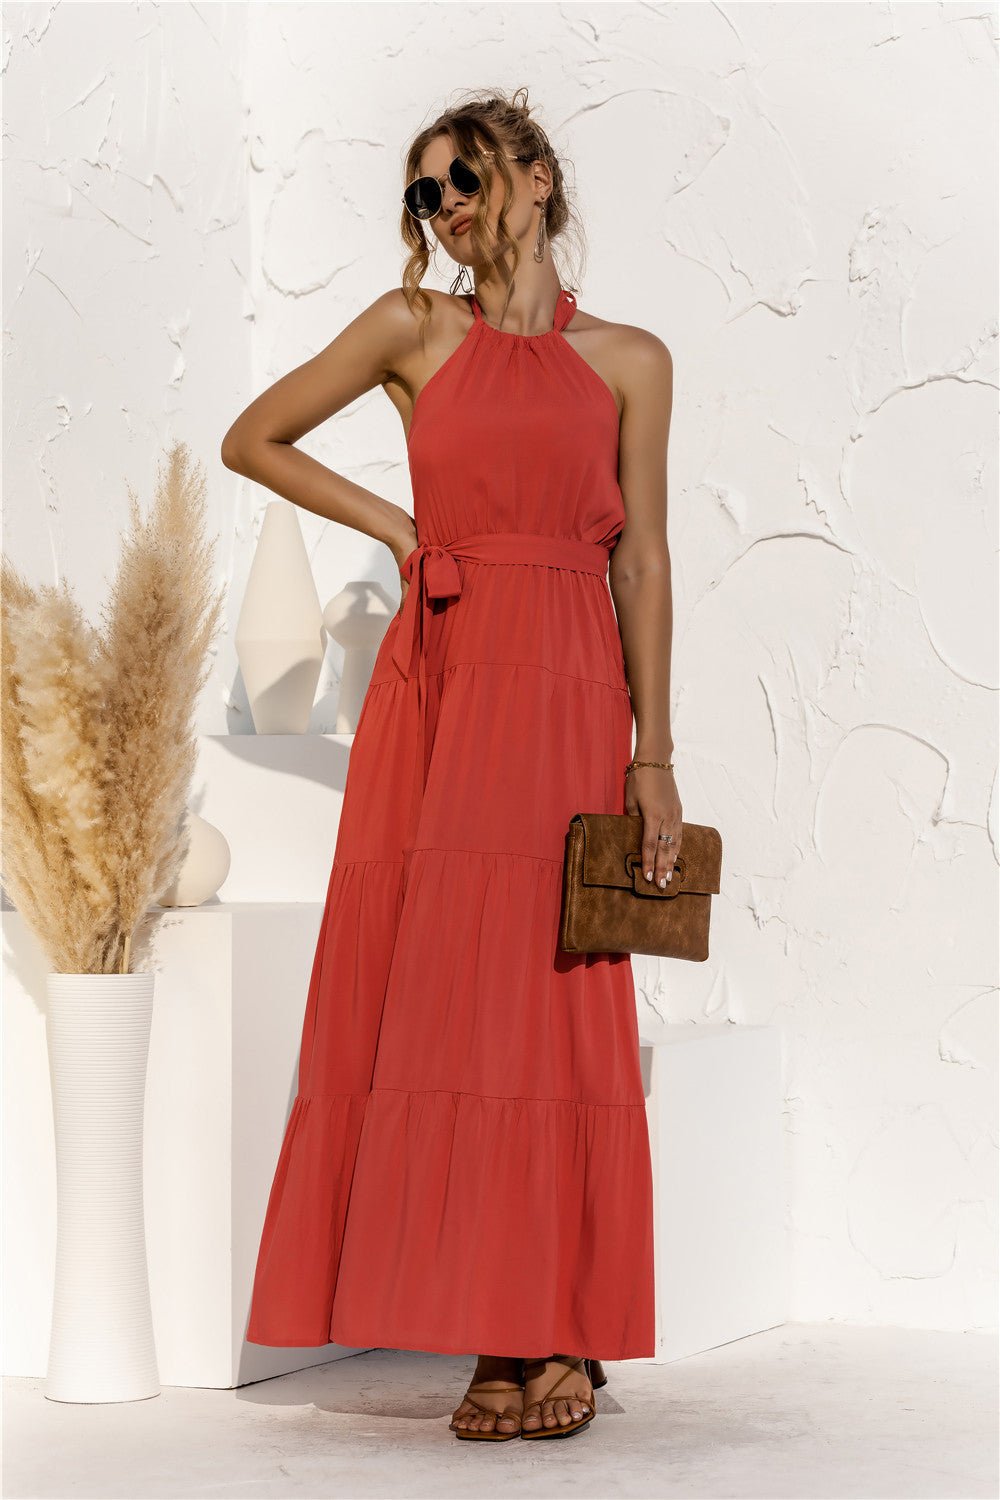 Halter Maxi Dresses - orange maxi dress with  tie straps and pleated silhouette. #Firefly Lane Boutique1